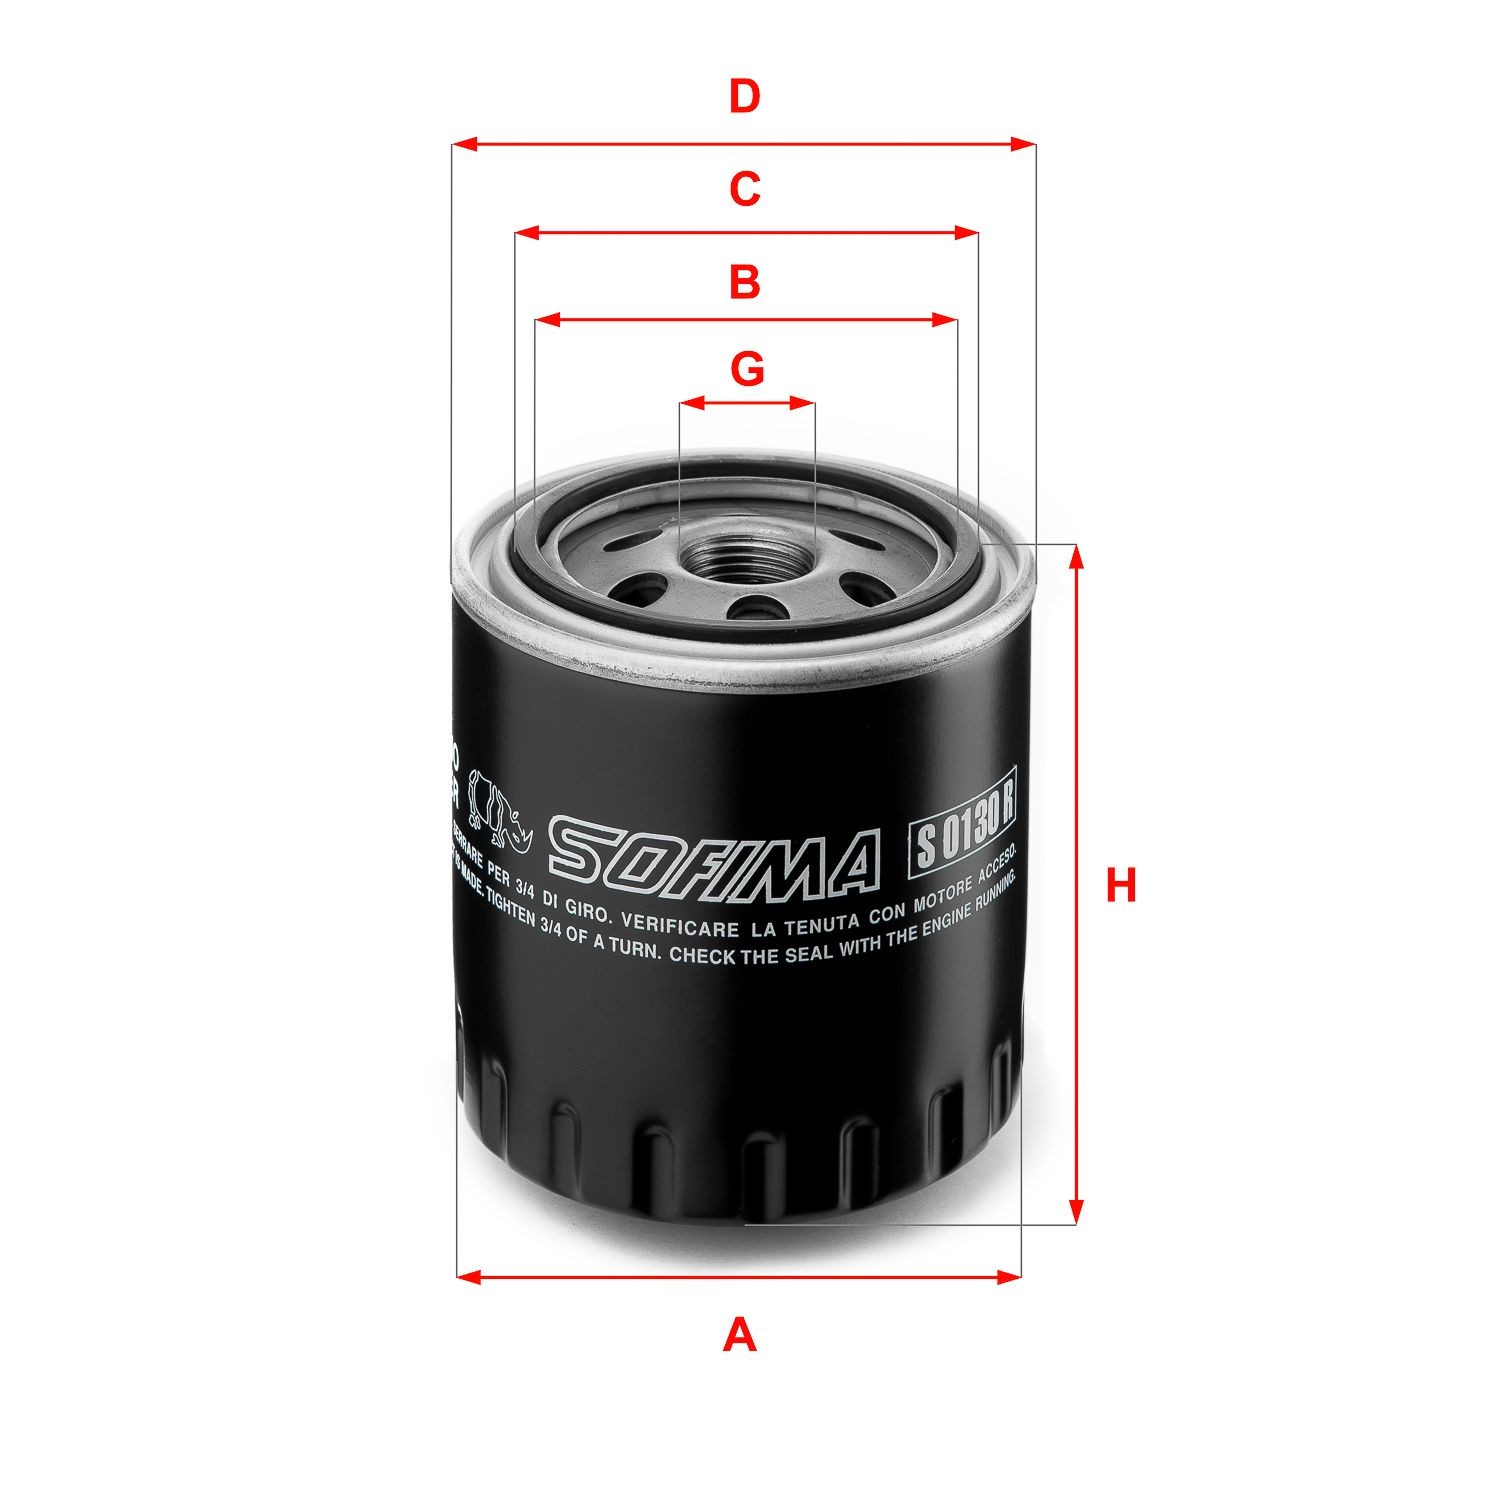 SOFIMA S 0130 R Oil filter M 20 X 1,5, with one anti-return valve, Spin-on Filter